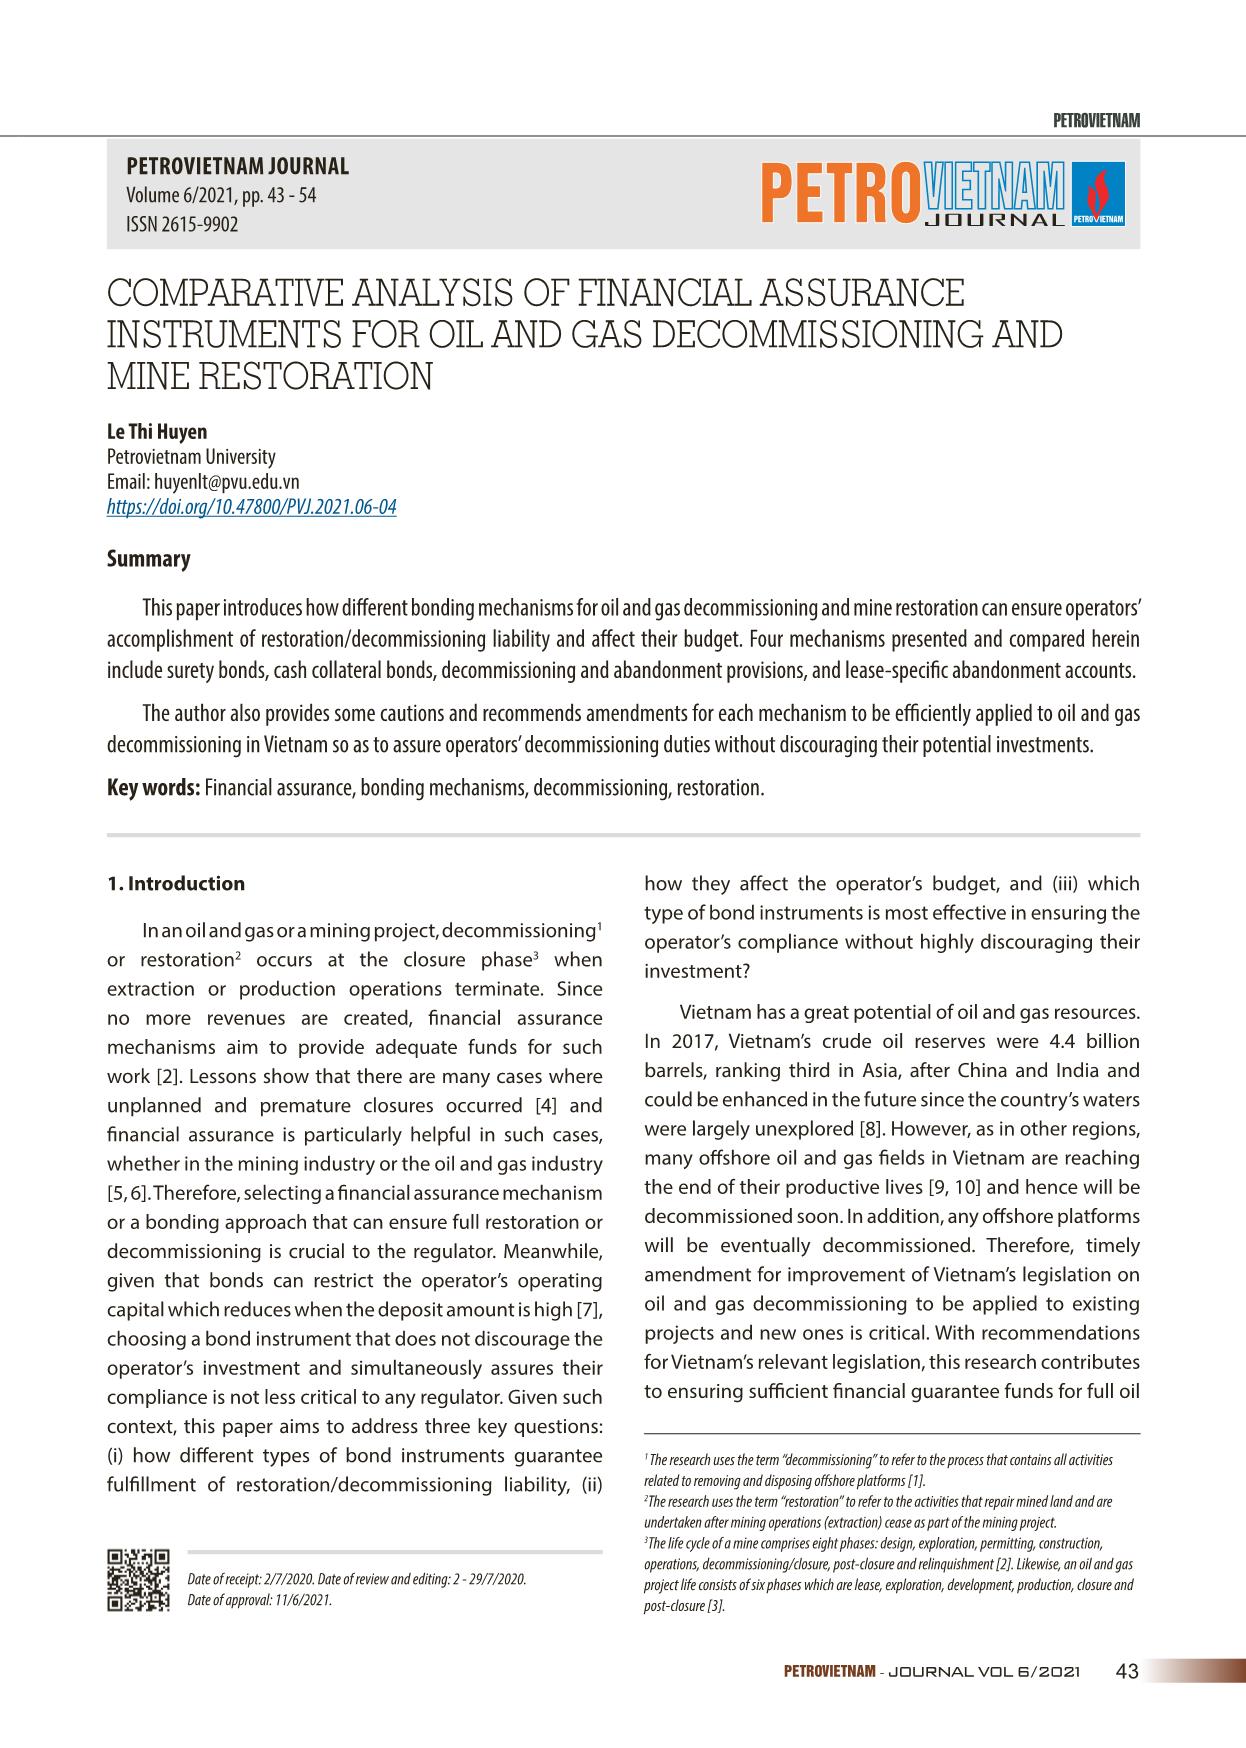 Comparative analysis of financial assurance instruments for oil and gas decommissioning and mine restoration trang 1